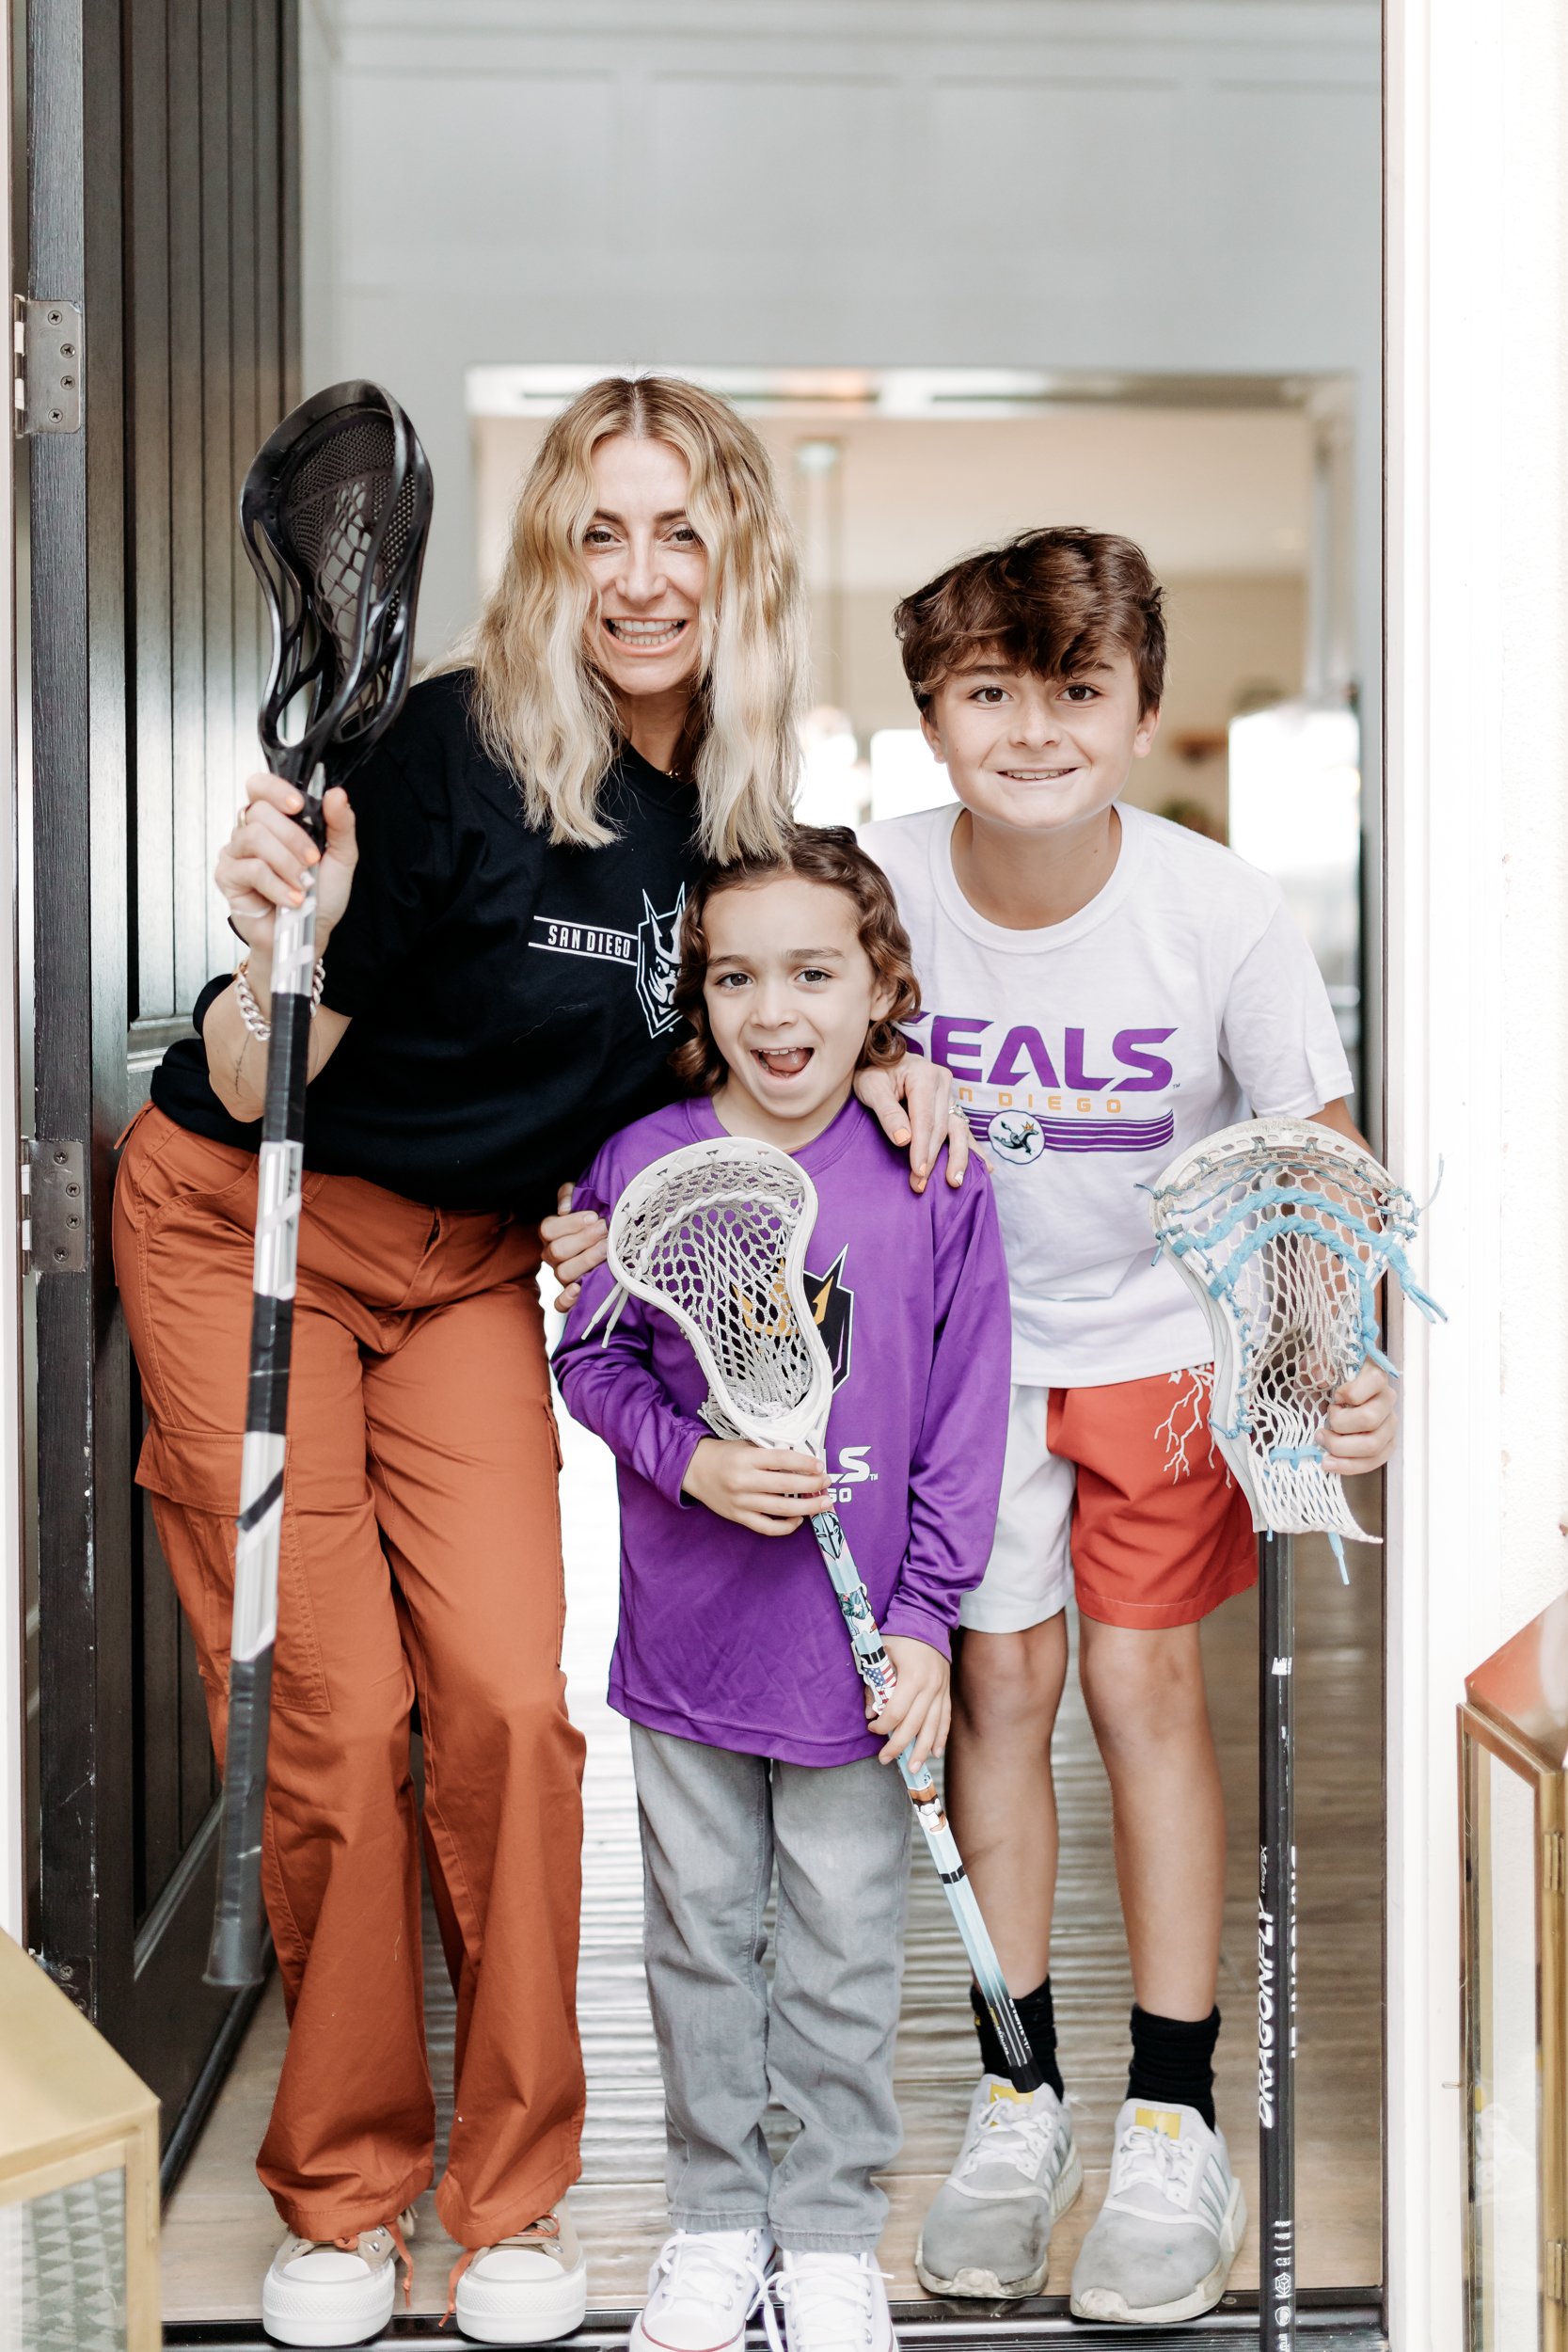 A mom and her sons pose in the doorway of their home with San Diego Seals tees on while holding lacrosse sticks. 